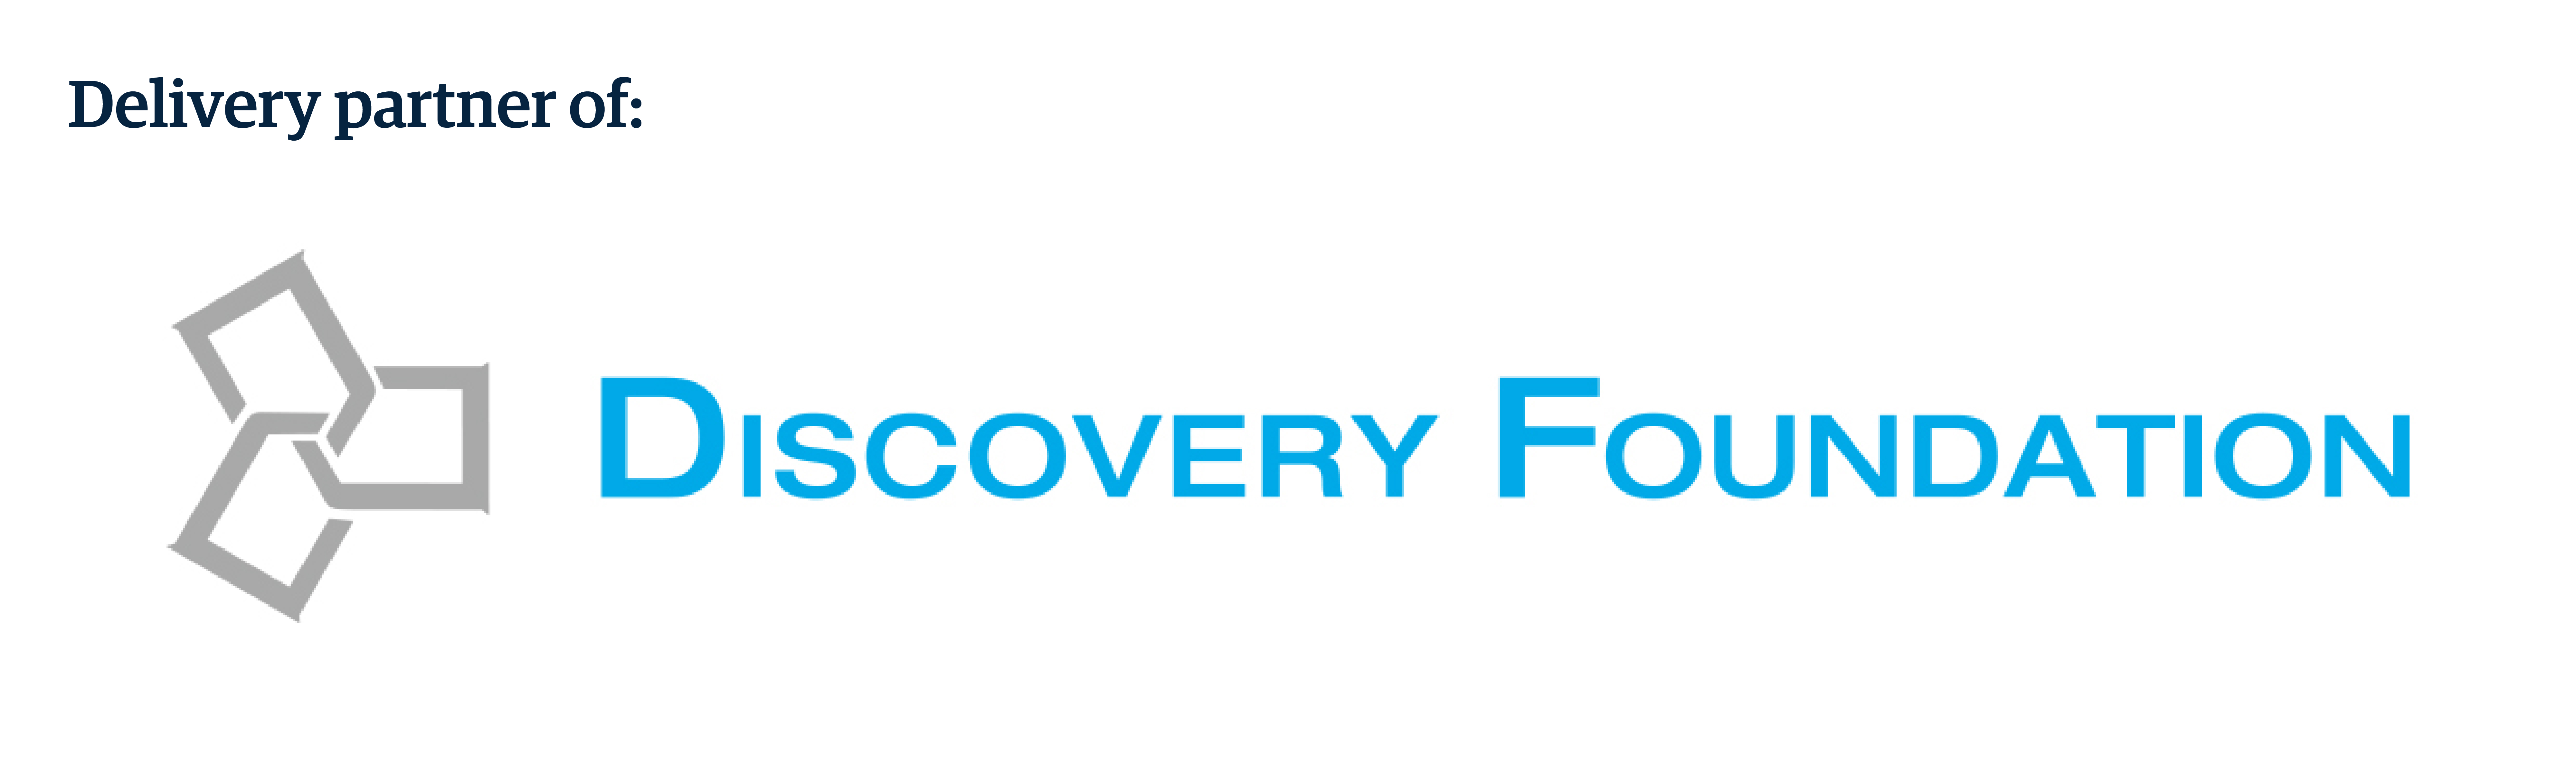 Delivery partner of: Discovery Foundation